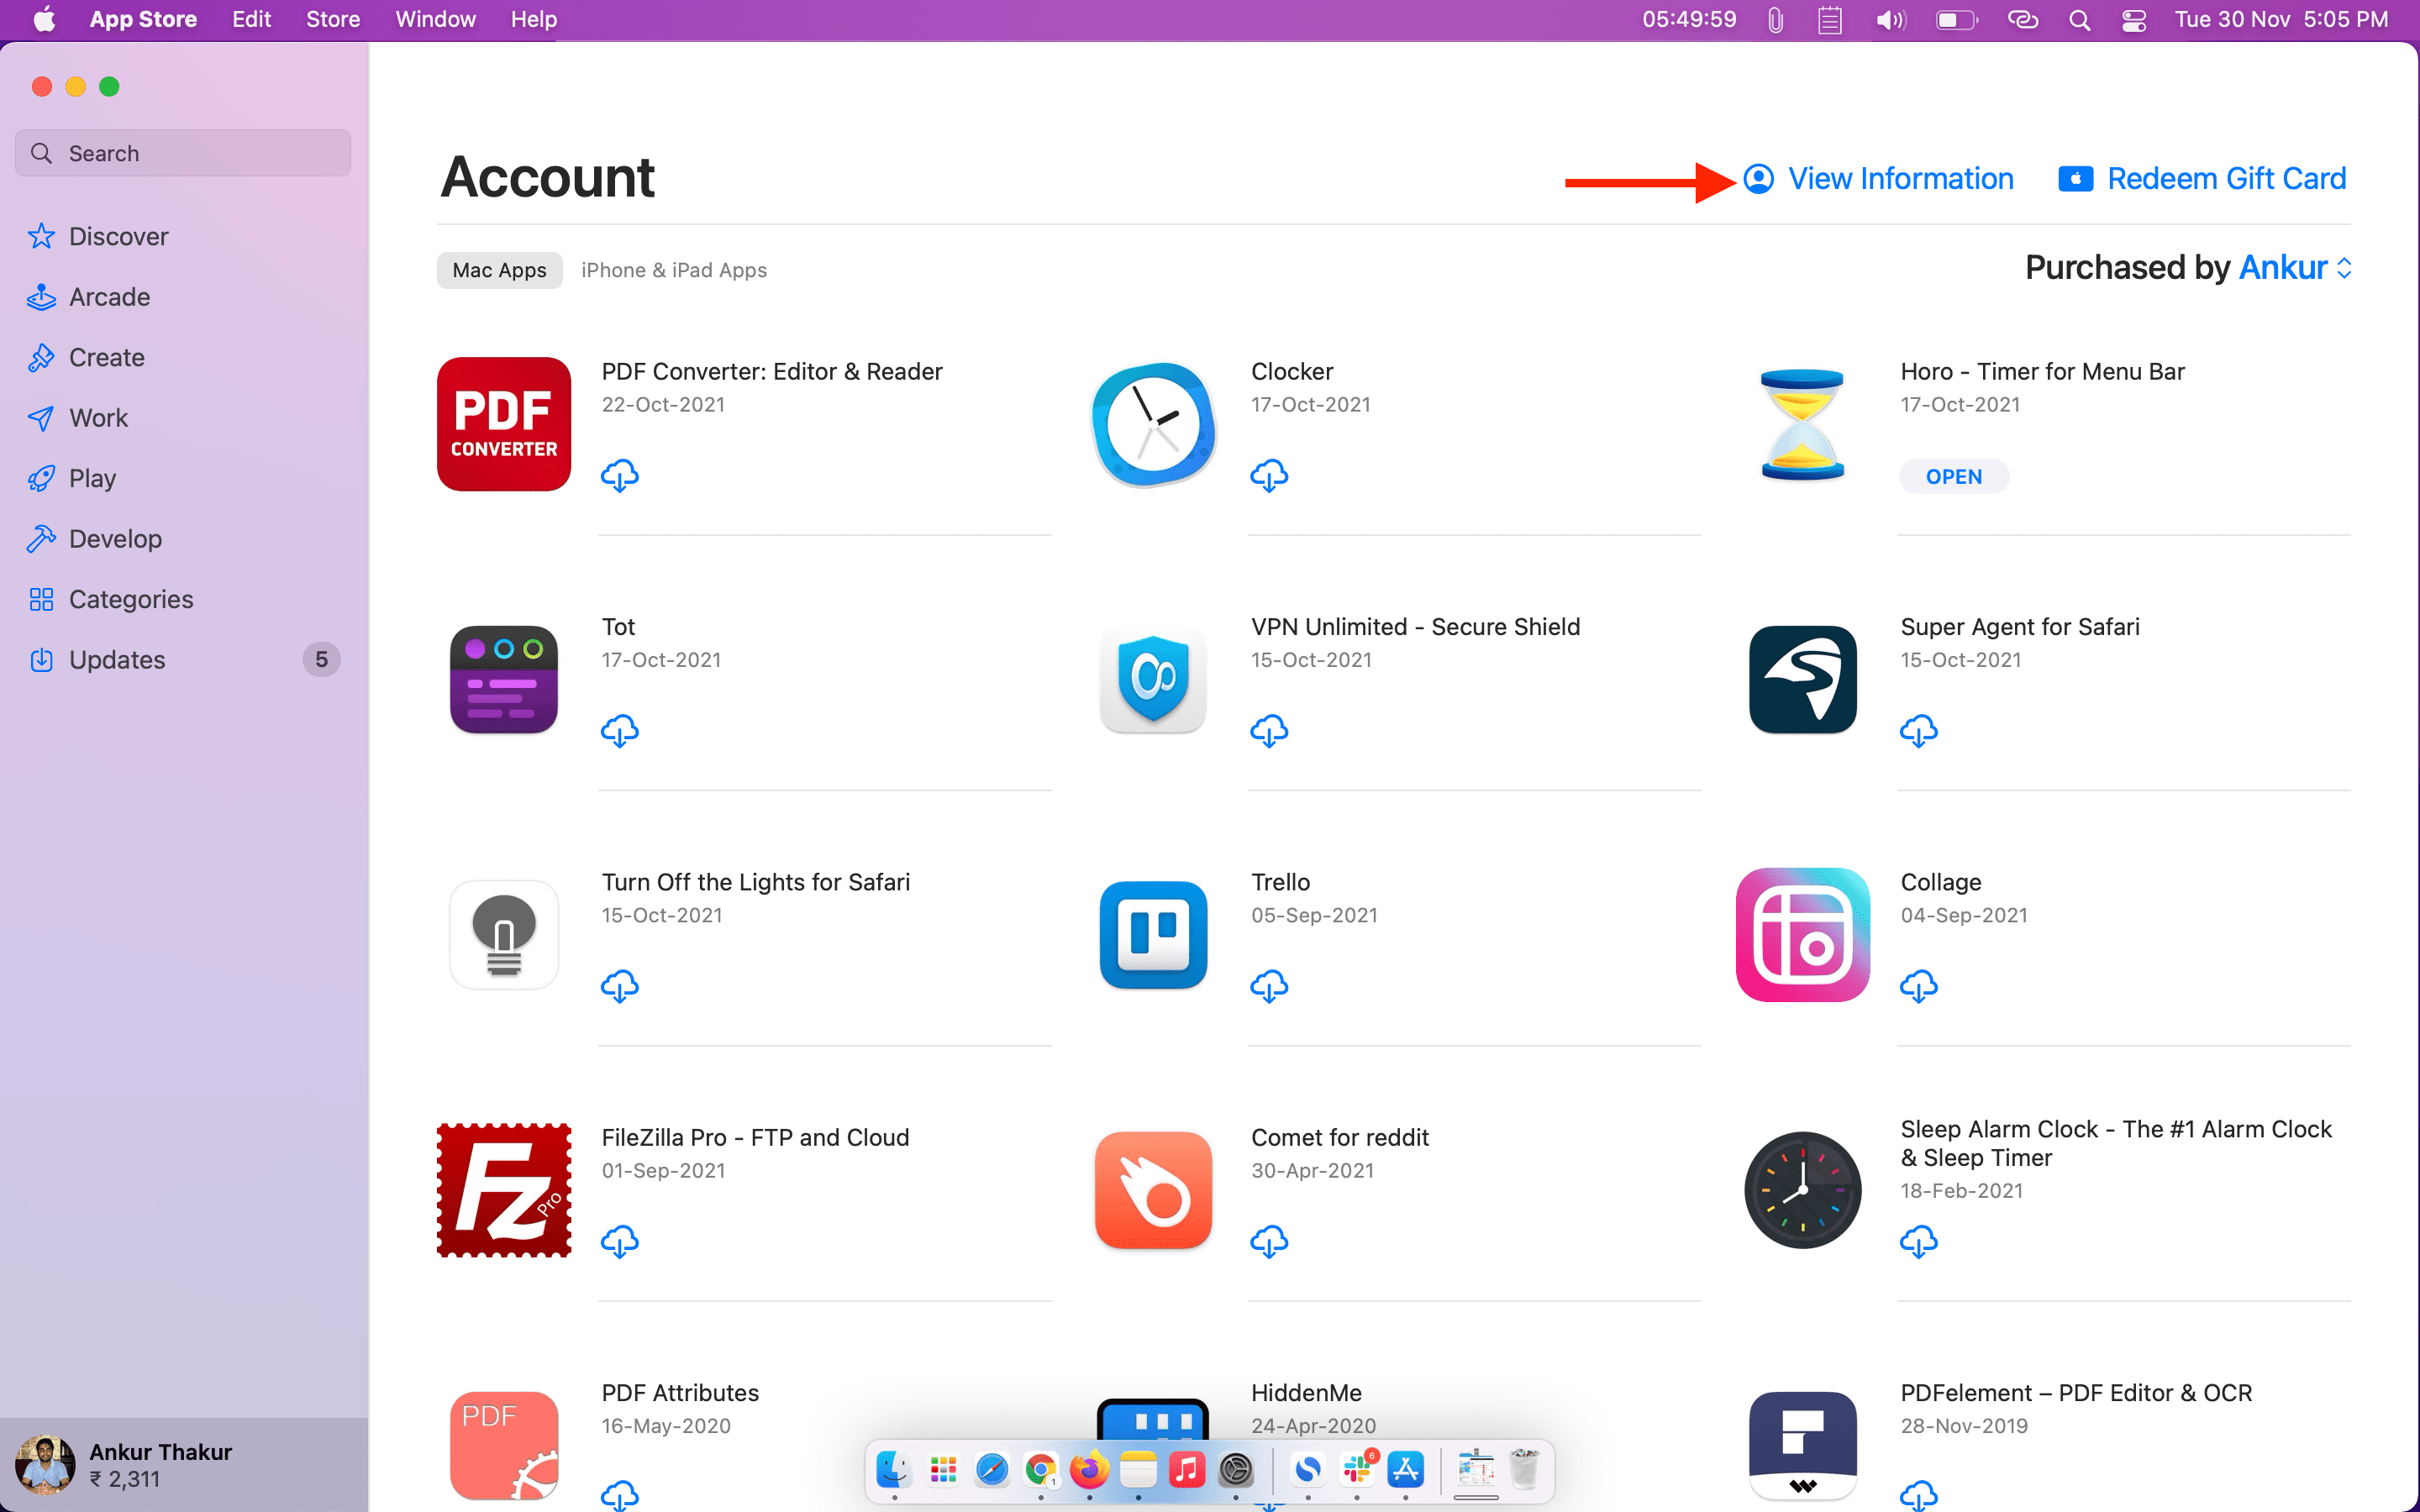 View Information on Mac App Store